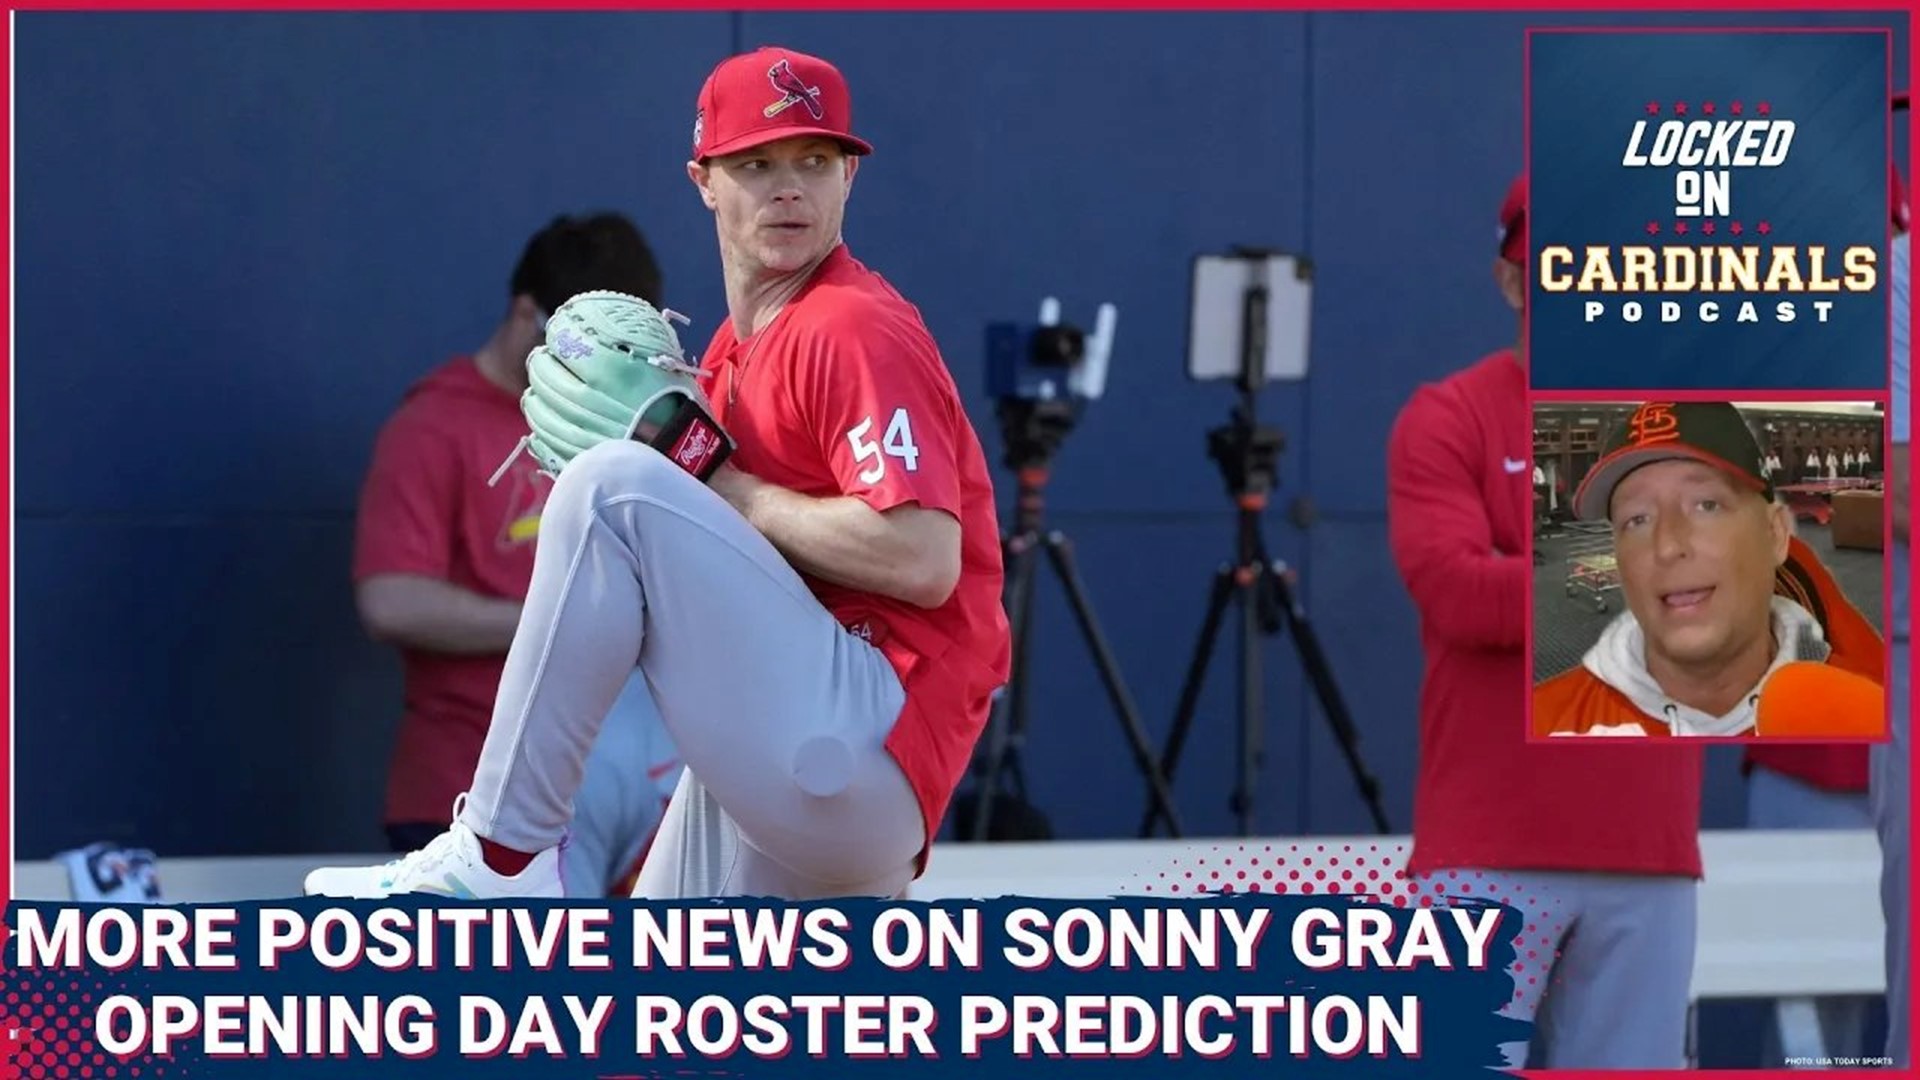 Injury Updates On Sonny Gray And Brandon Crawford, Opening Day Roster